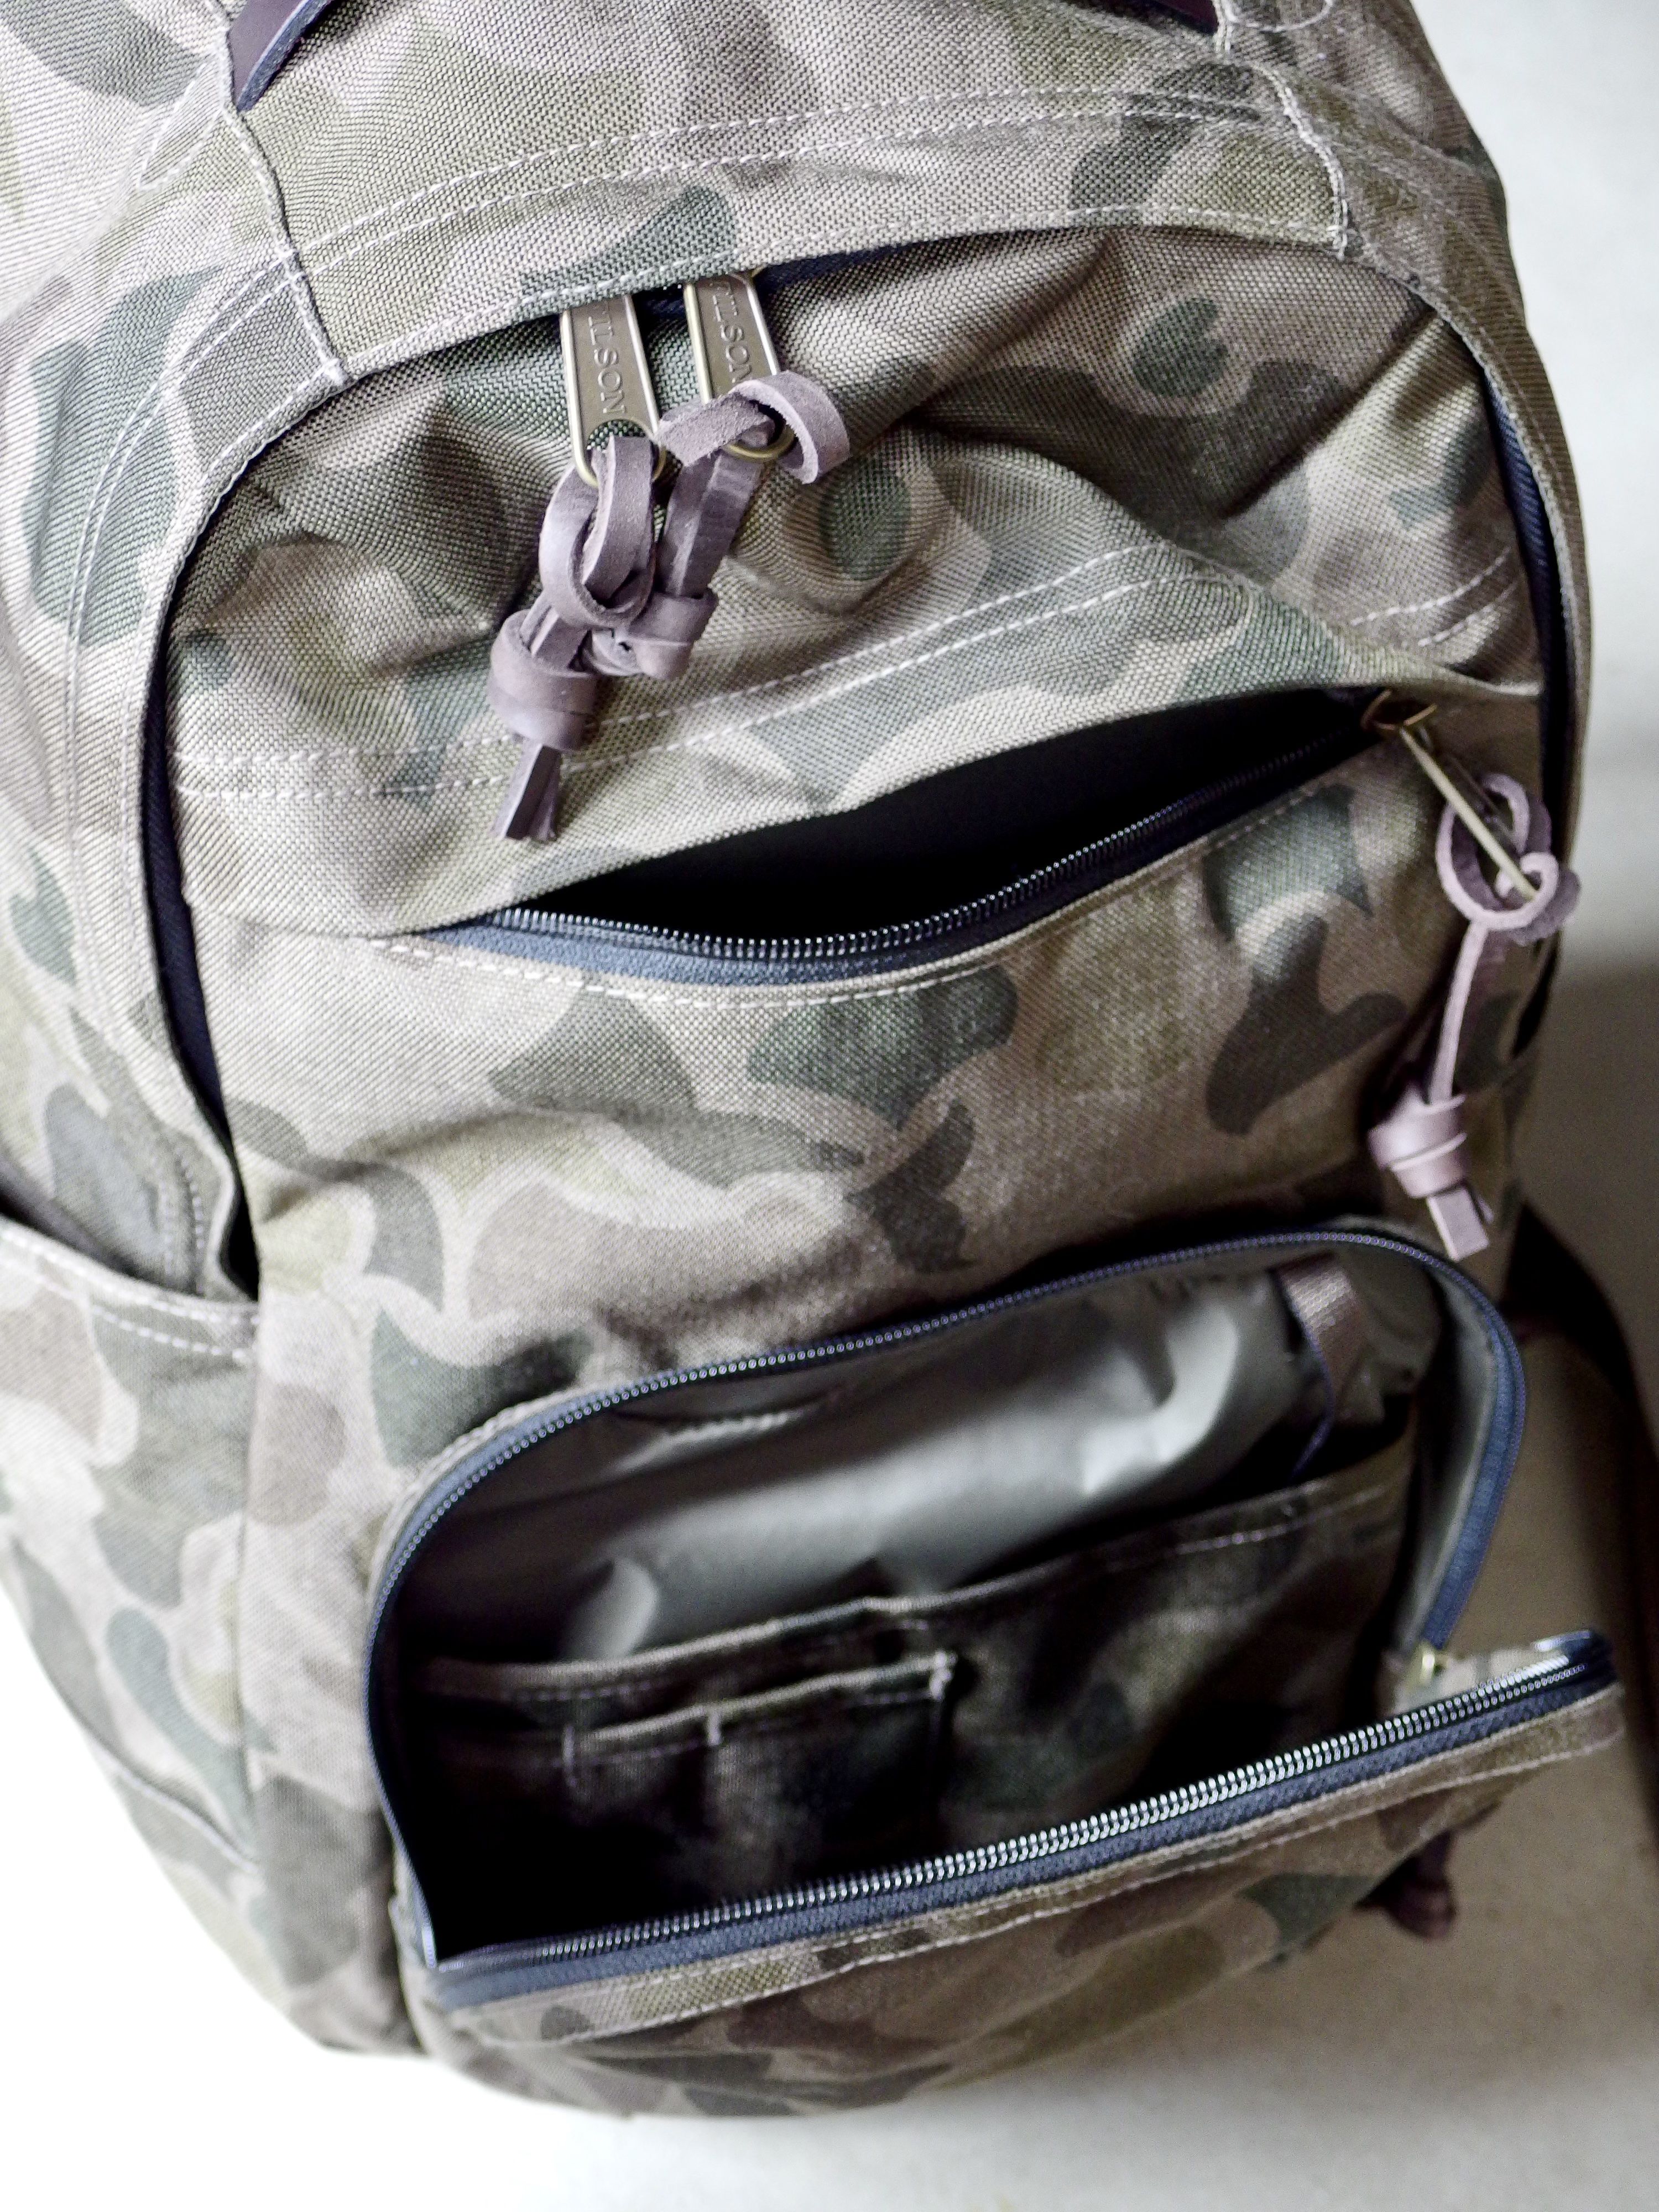 Filson Dryden Backpack Review: A Bag You'll Own Forever